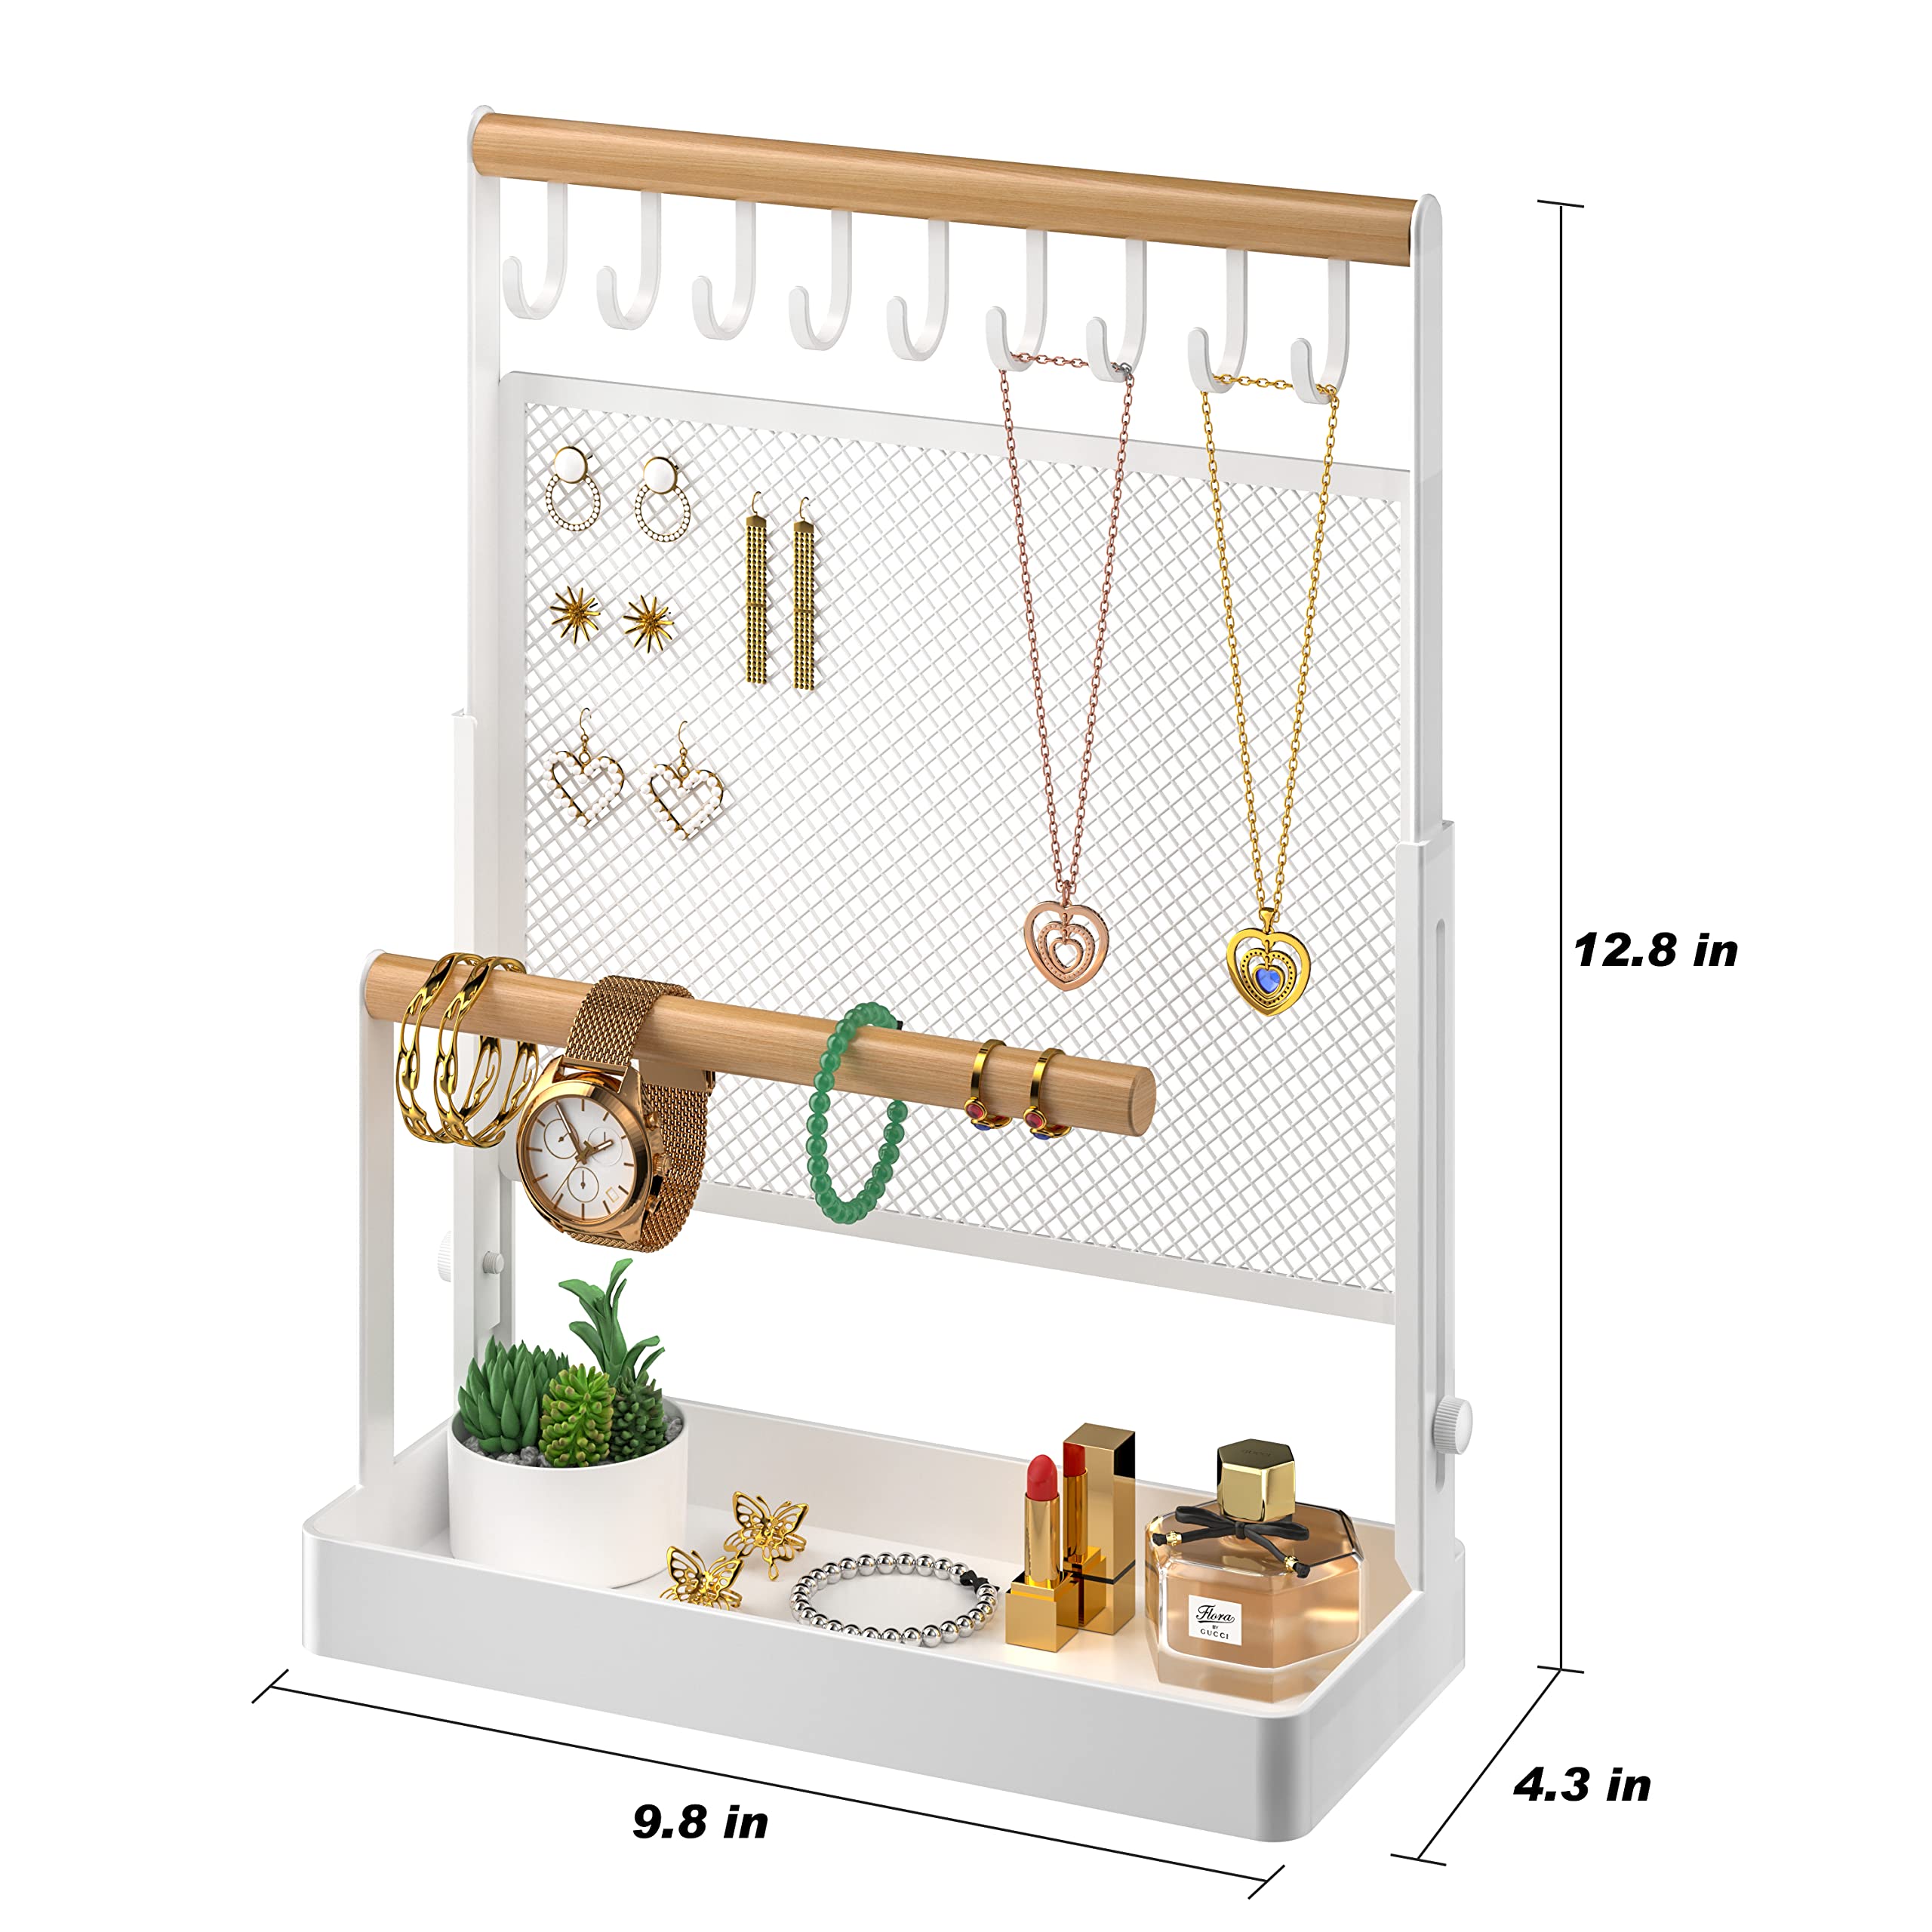 IOAIANIA Jewelry Organizer Stand, Liftable Necklace Holder with Earring Organizer Net, 9 Hooks Necklaces Storage Wooden Handing Bar for Bracelets Watches Rings (White)